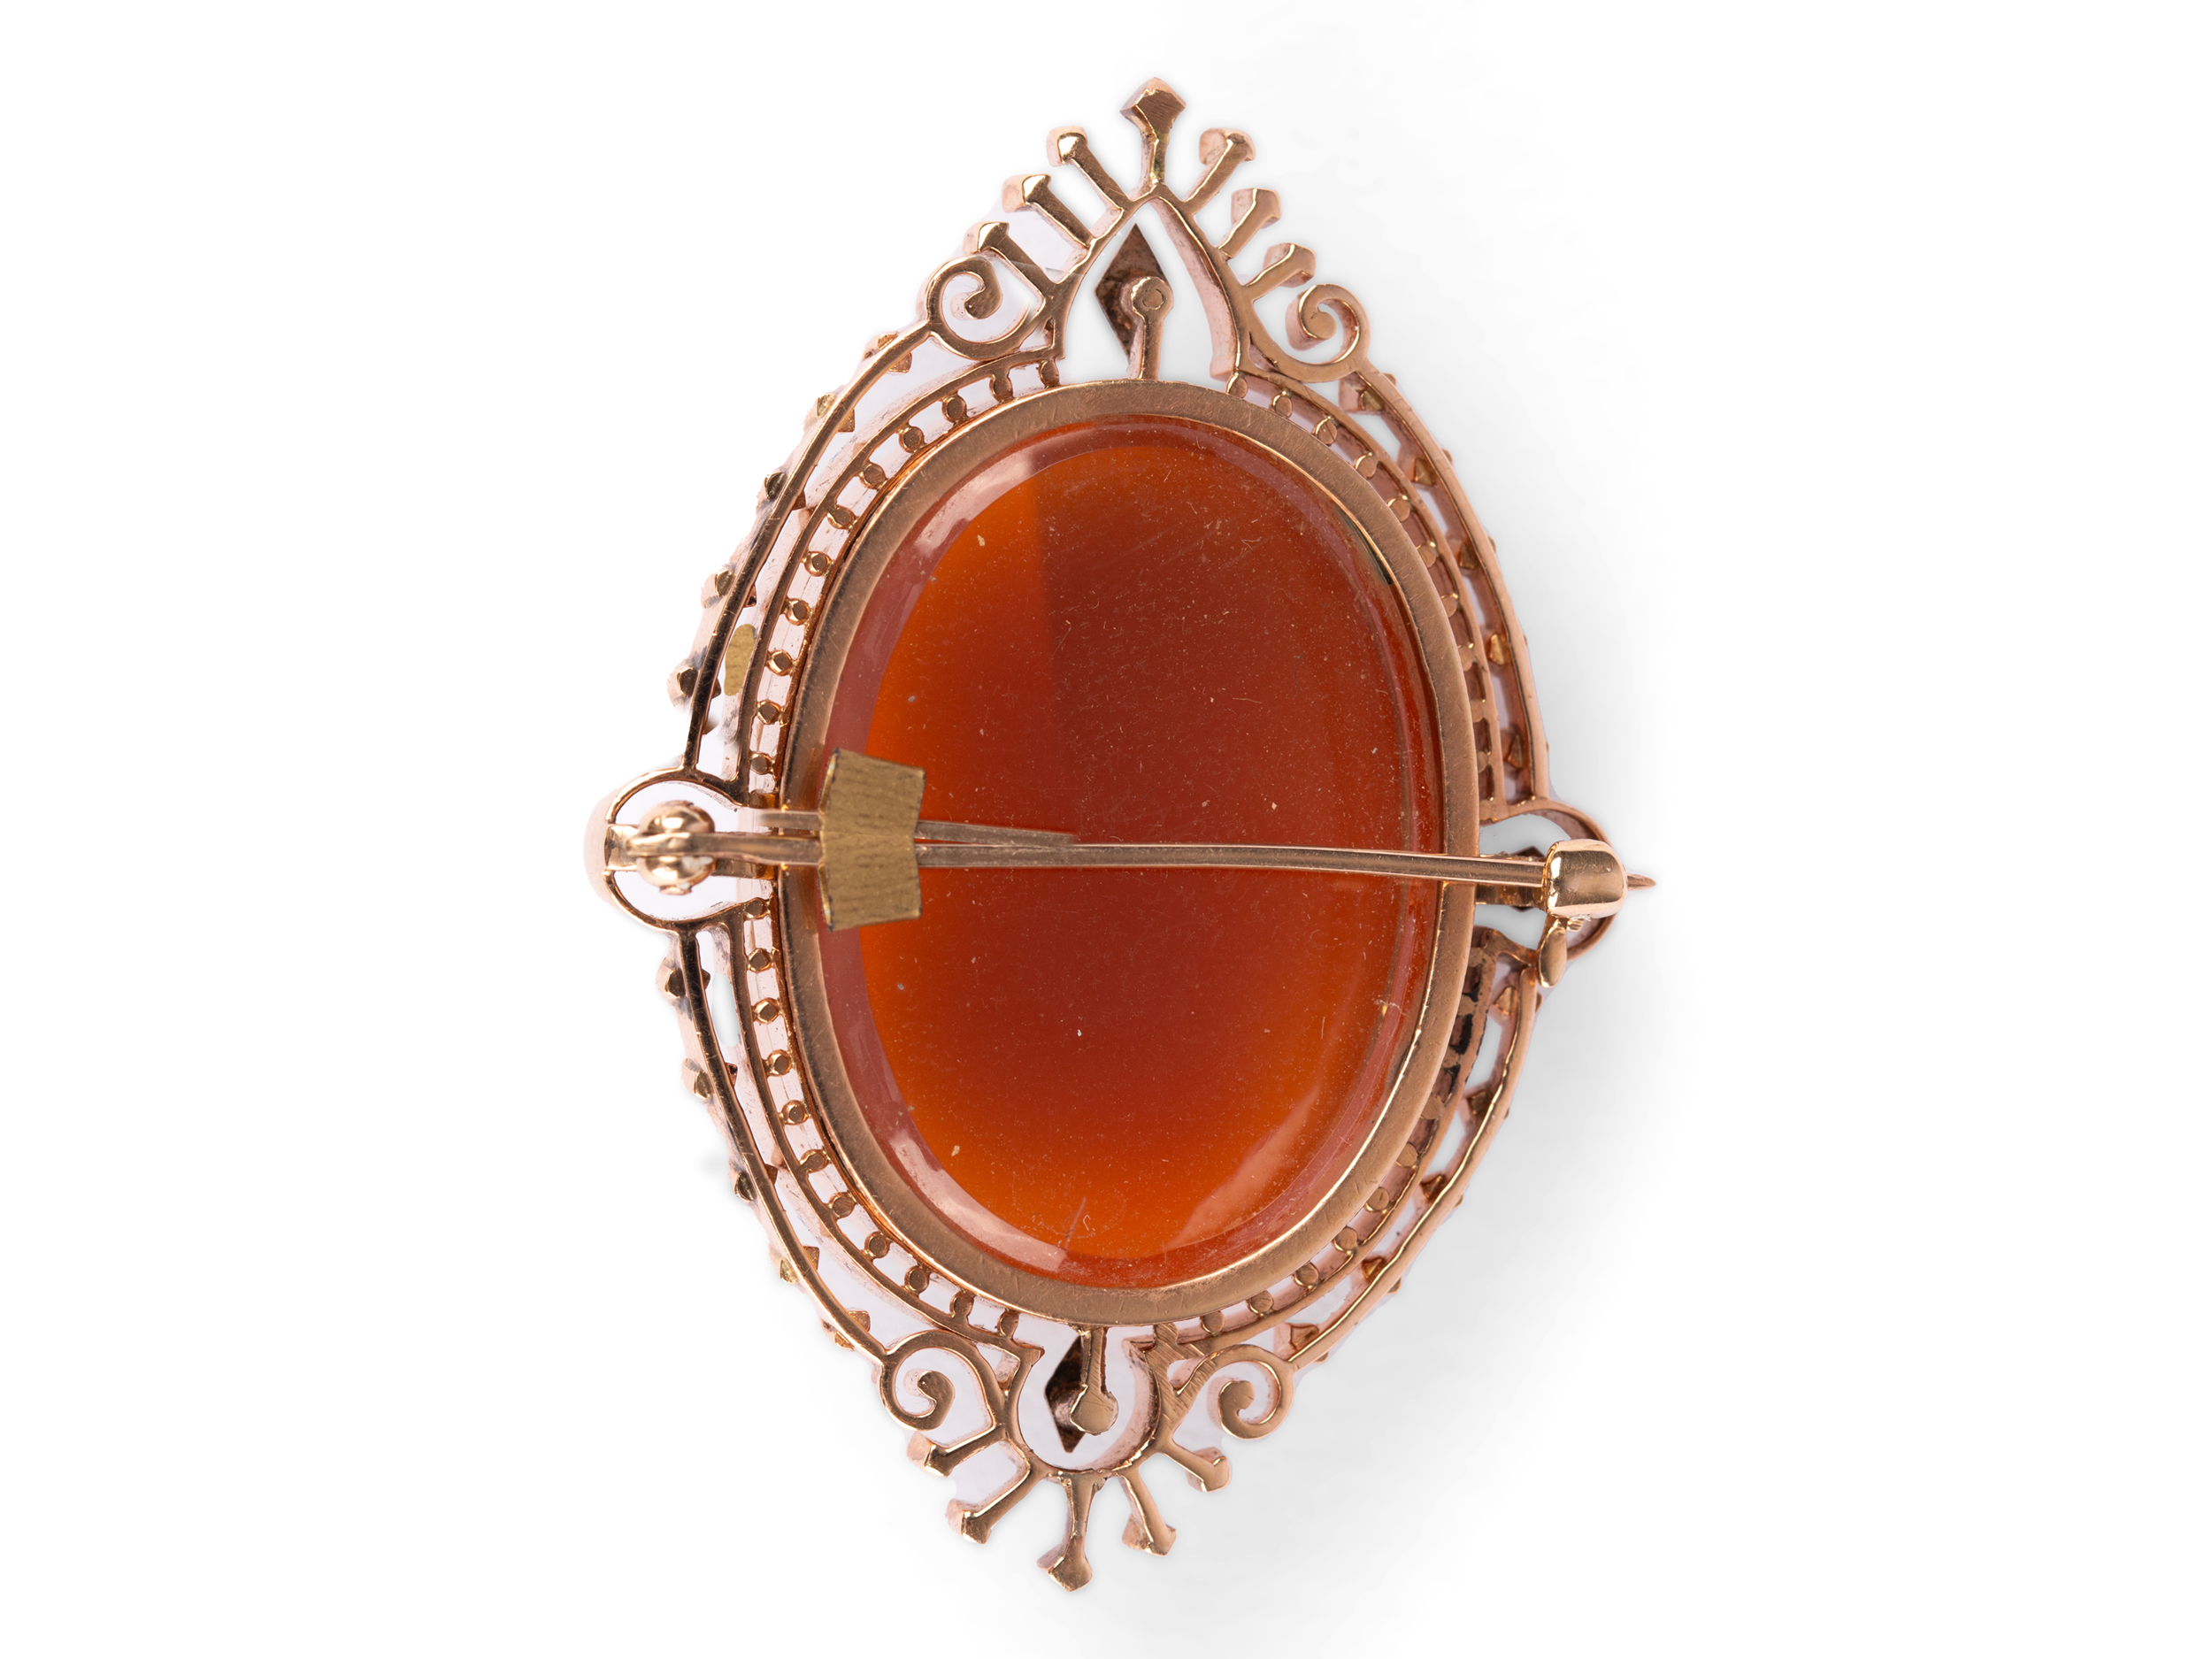 Oval brooch with stone cameo, France?, Around 1870 - Image 2 of 2